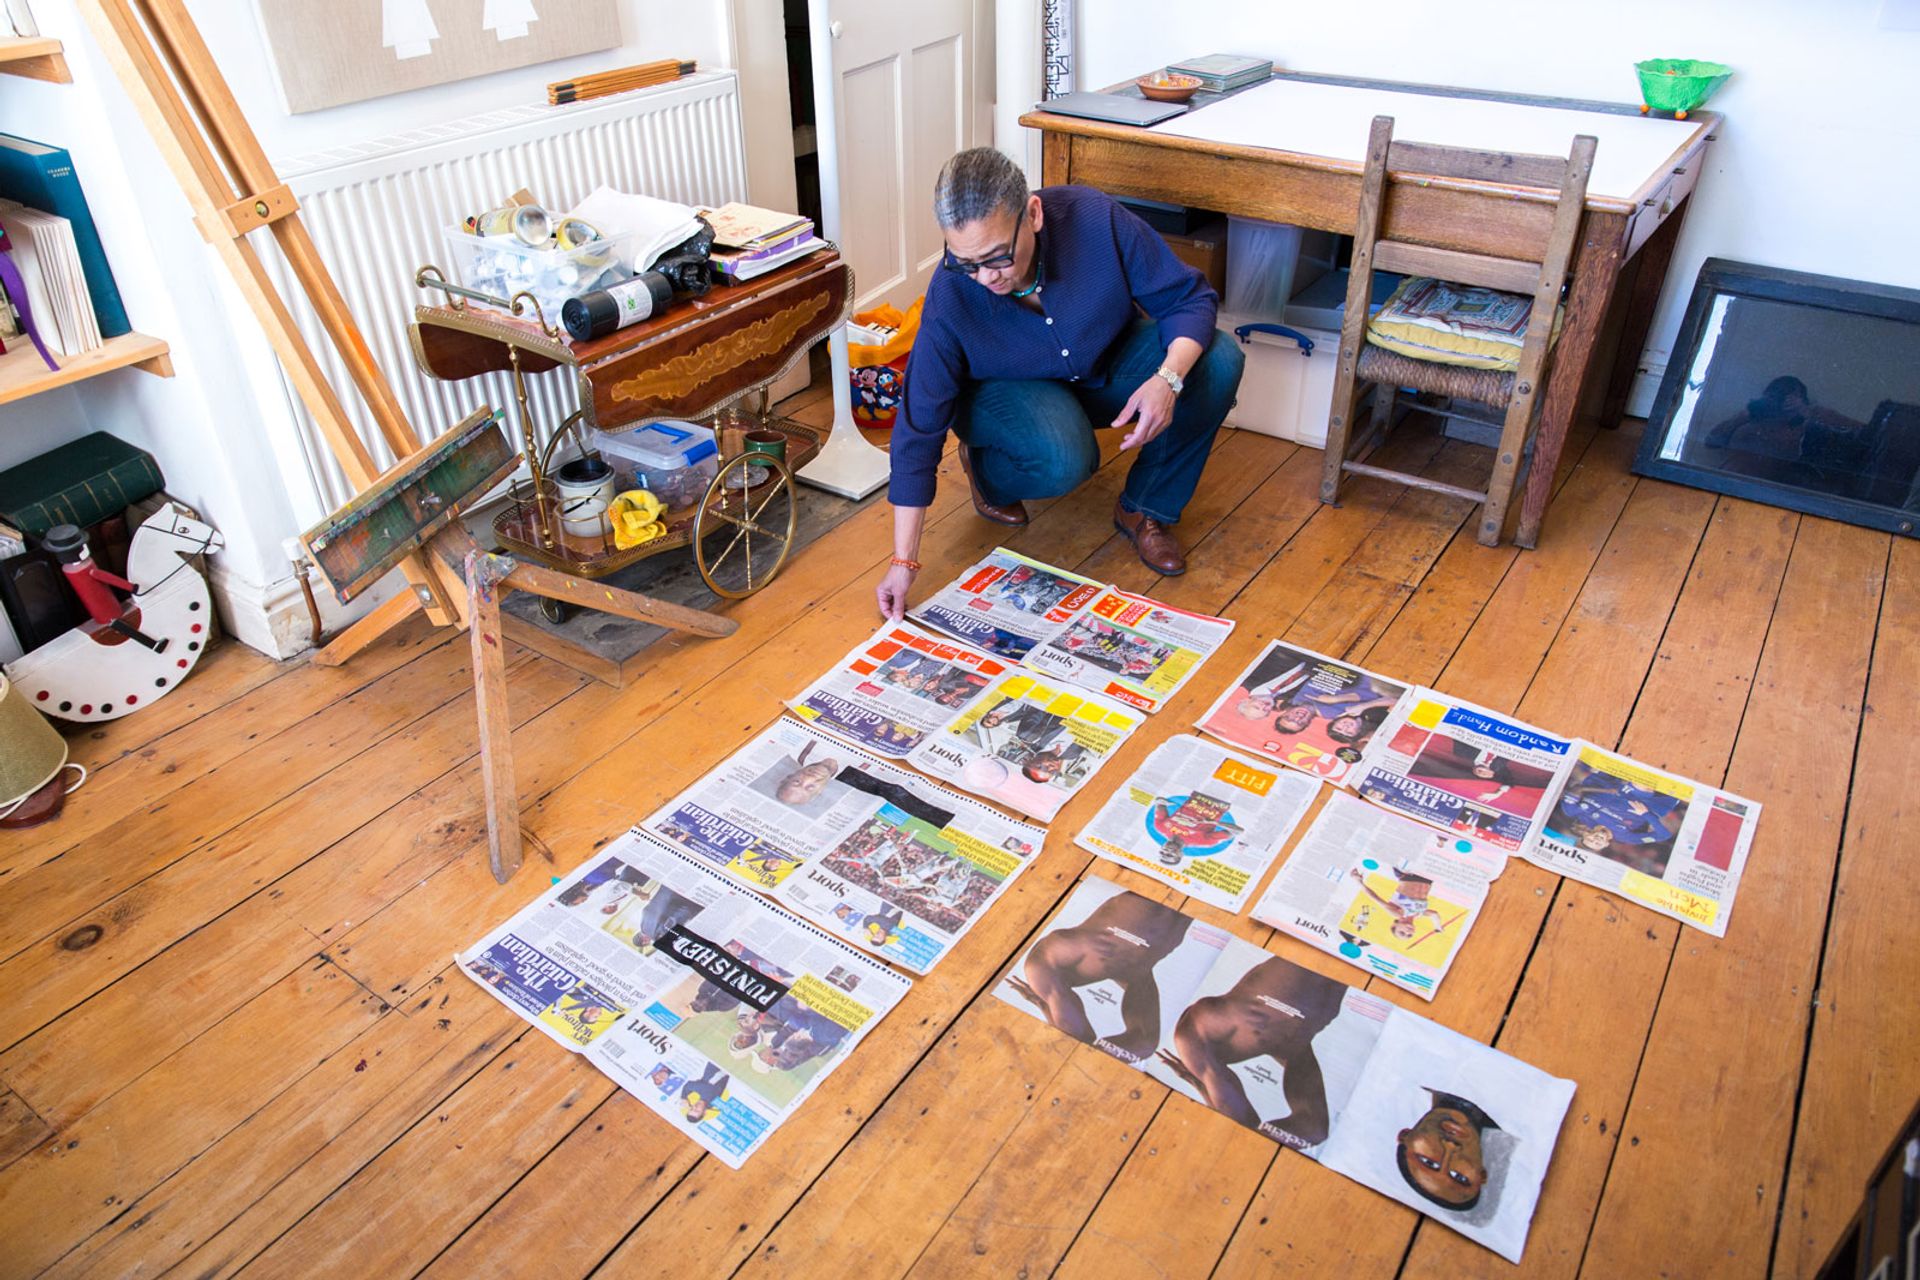 Lubaina Himid is a long-time reader of the Guardian © Michelle Roberts